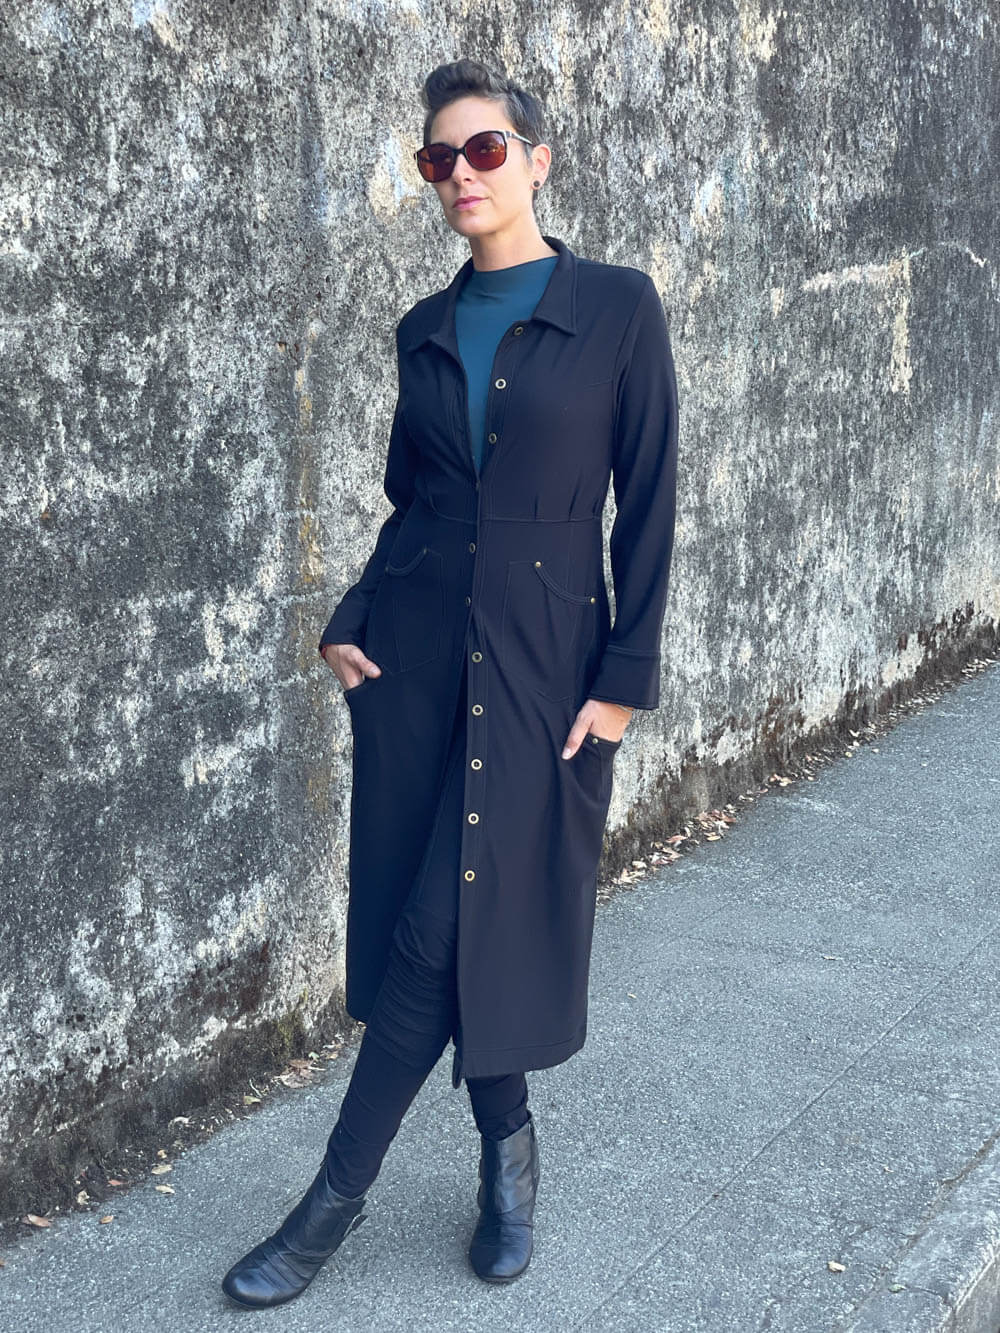 caraucci bamboo spandex black coat dress with 6 pockets and brass buttons up the front, can be worn as a jacket or dress #color_black